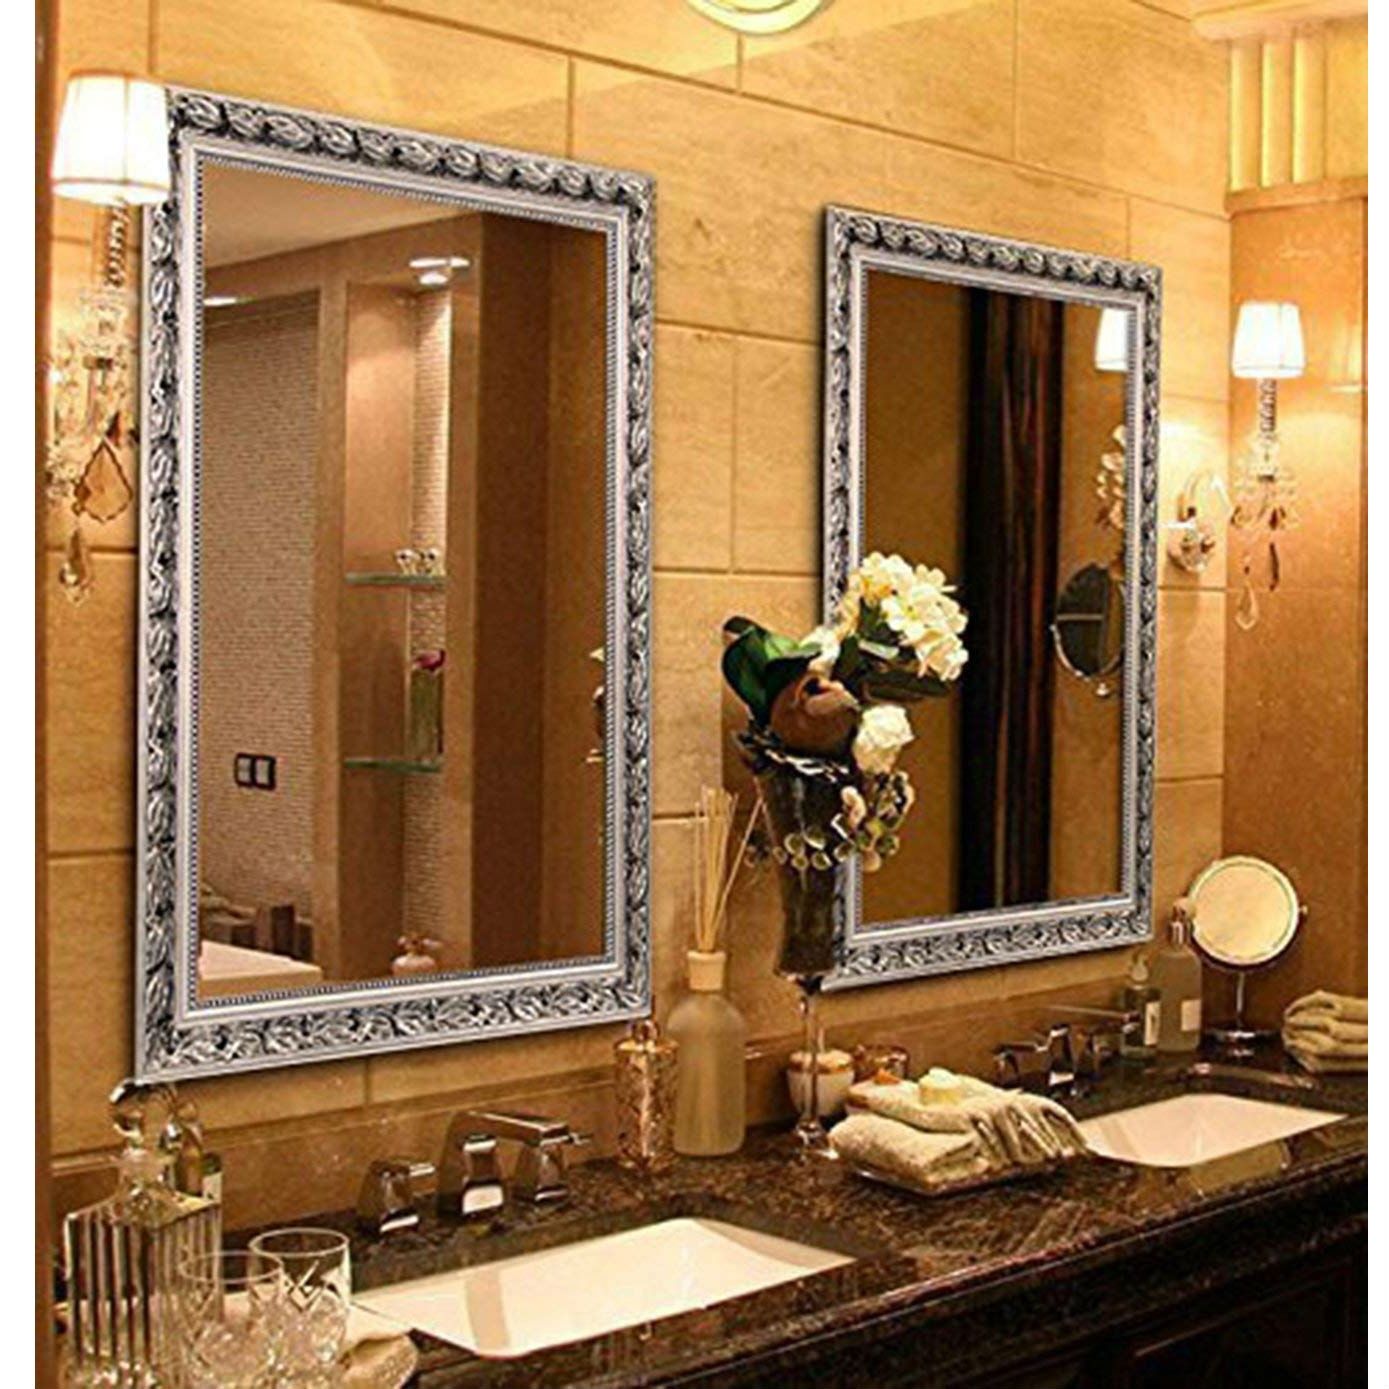 Large 38 X 26 Inch Bathroom Wall Mirror With Baroque Style Silver Wood For Wall Mirrors (View 9 of 15)